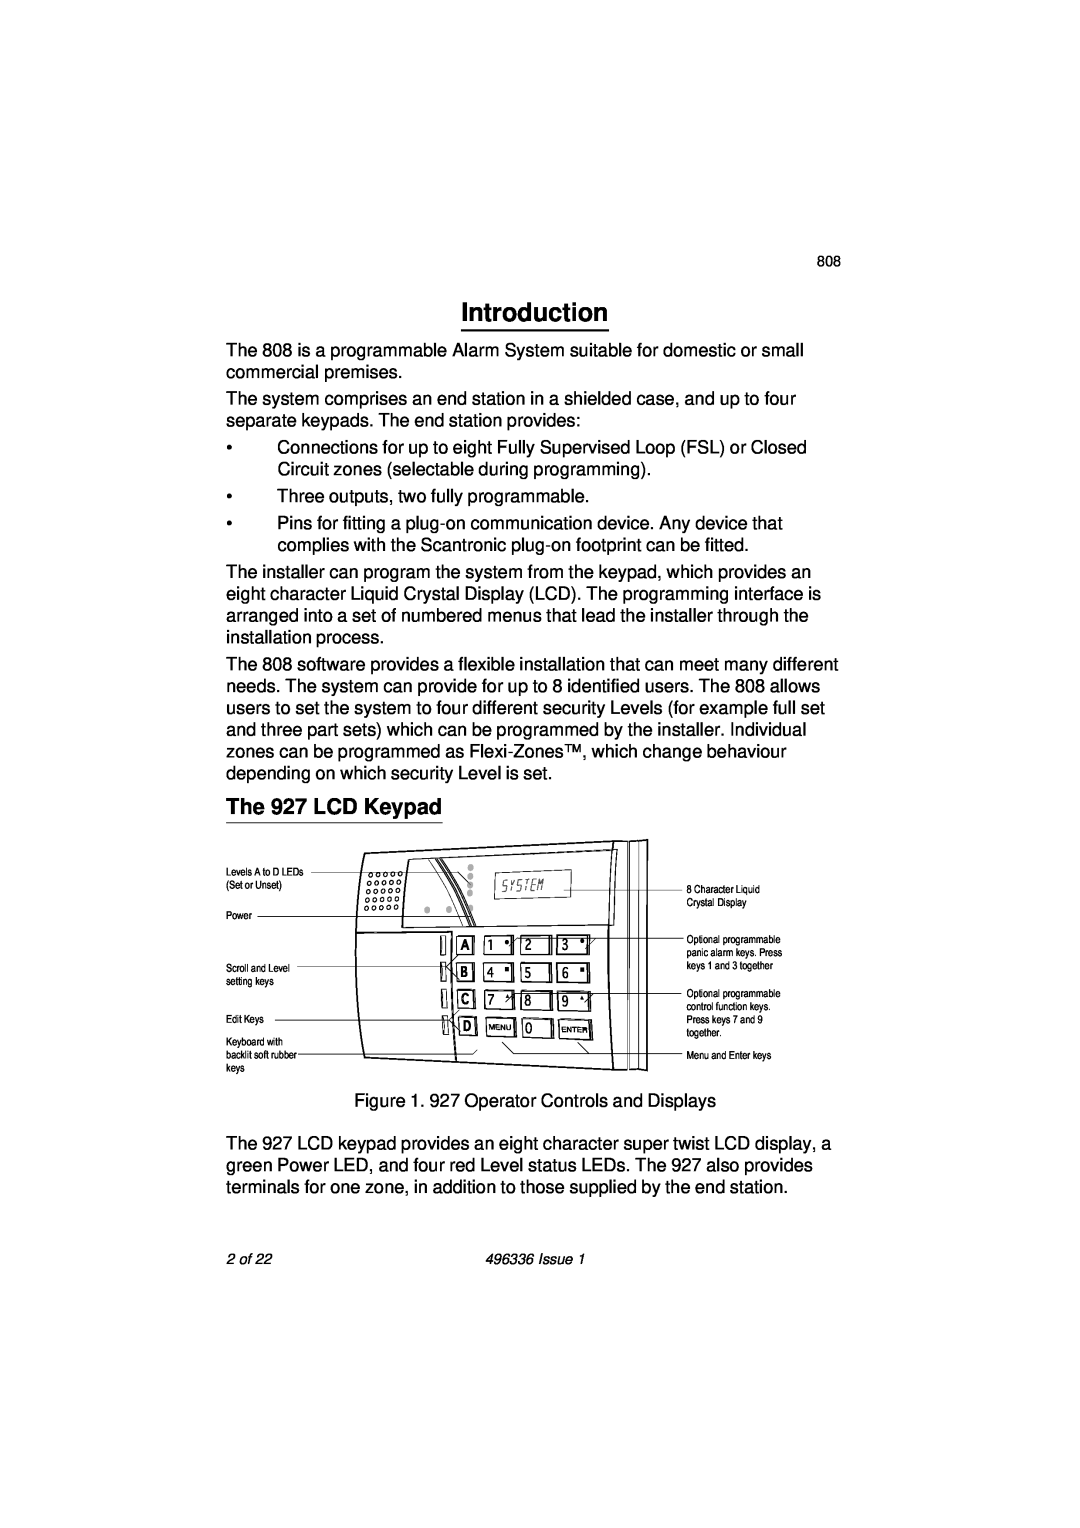 Security Centres 808 manual Introduction, The 927 LCD Keypad 